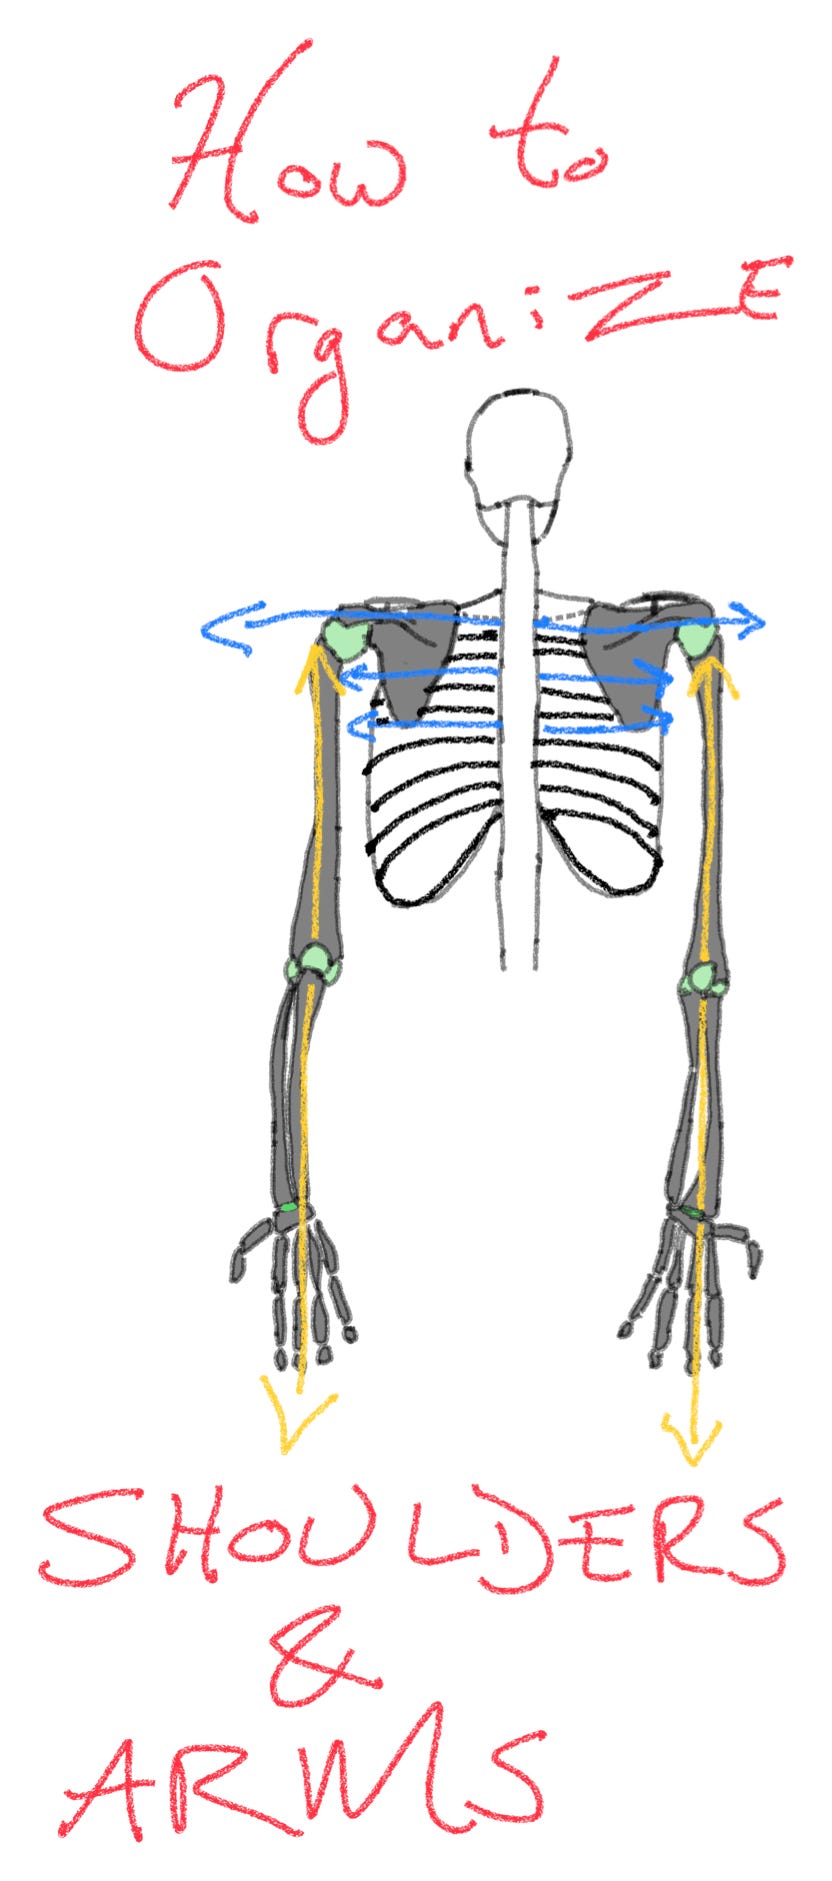 Image of Shoulder Apart and Pull at the Elbow.